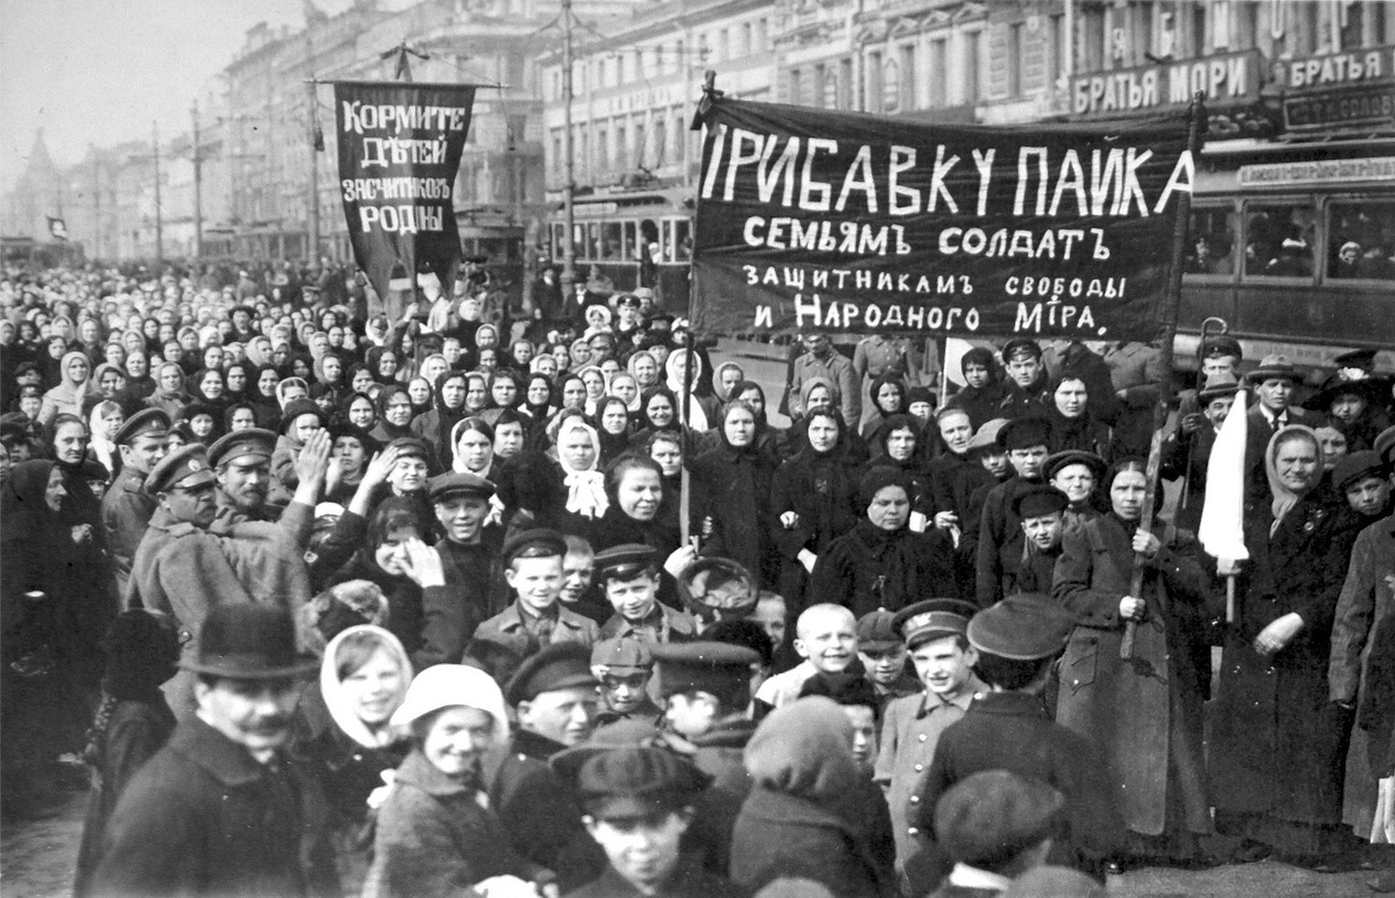 striking-putilov-workers-on-the-first-day-of-the-february-revolution-st-petersburg-russia-1917-artist-anon-464434763-58e846325f9b58ef7ec66691